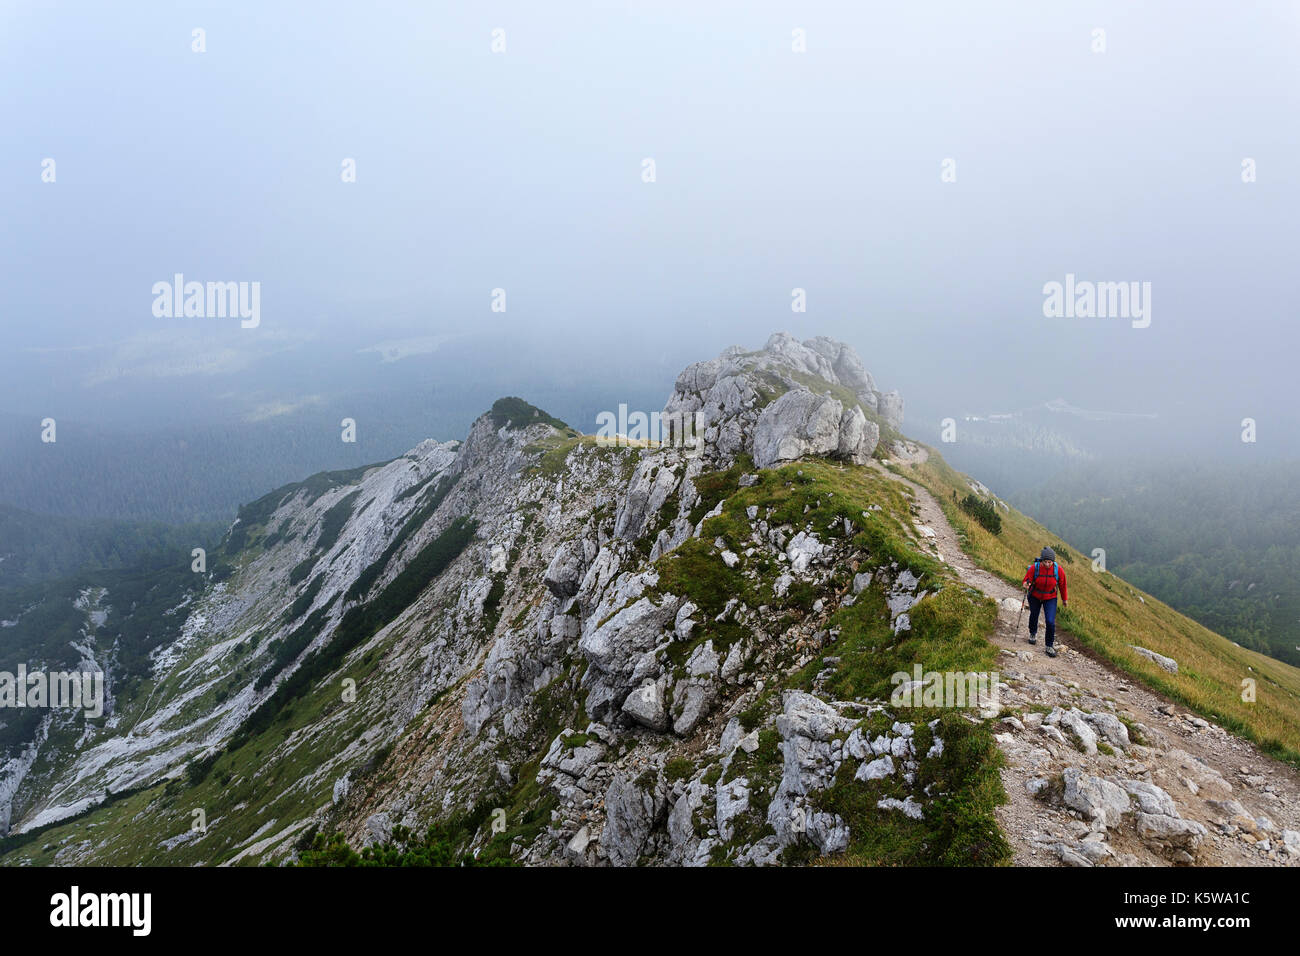 Woman in red windproof jacket hiking on a mountain covered in fog, Visevnik, Julian Alps, Slovenia. Stock Photo